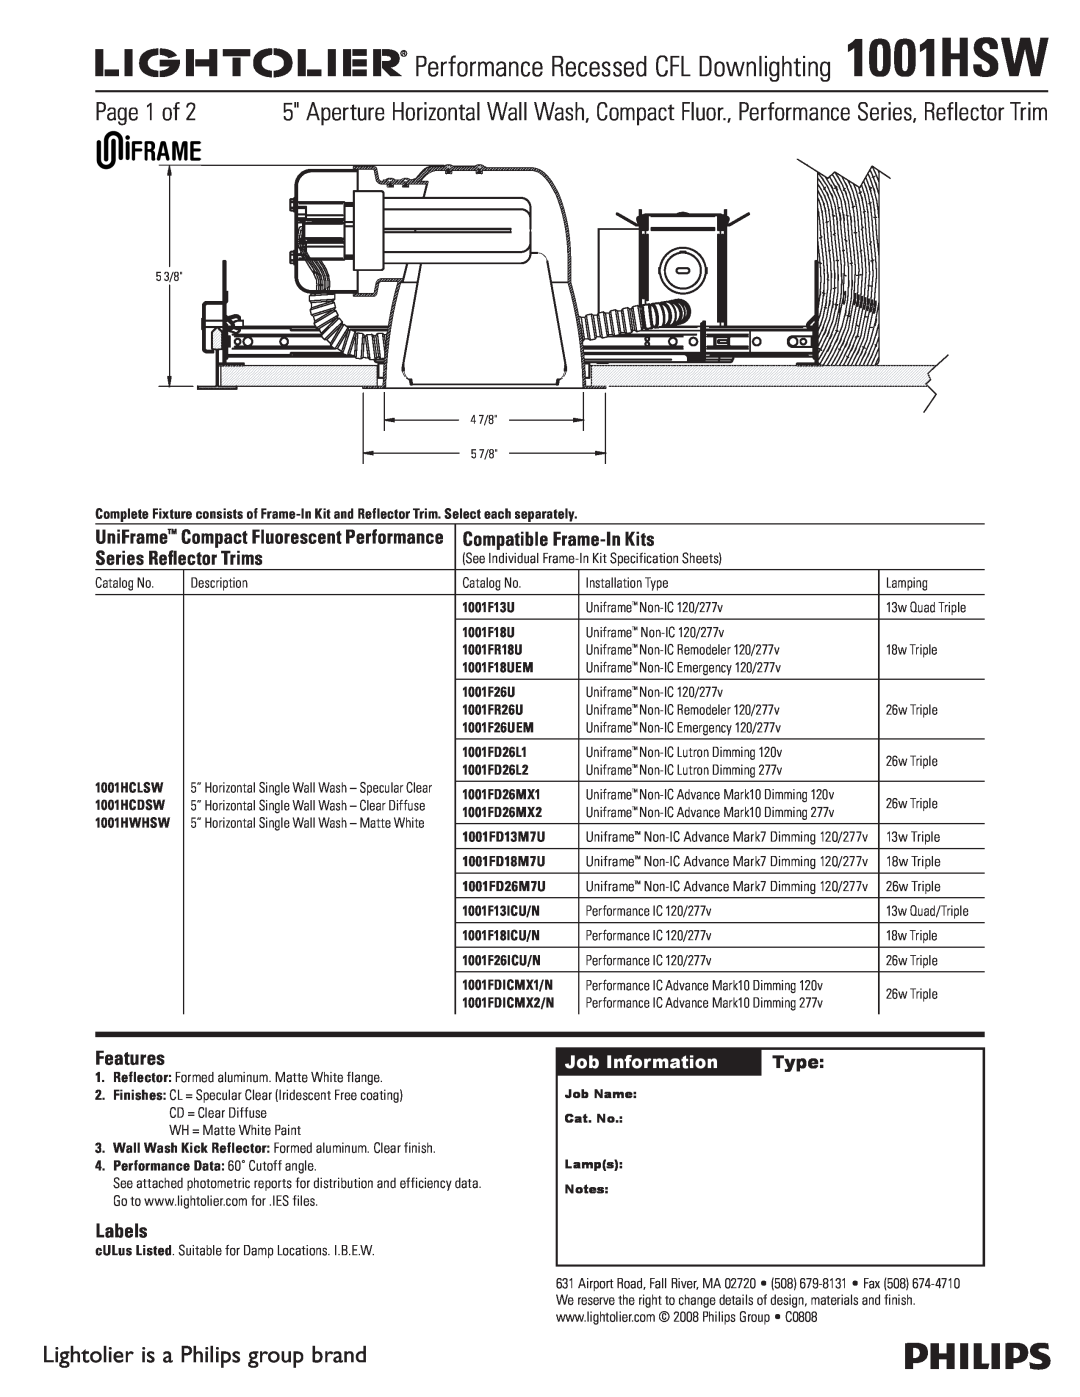 Lightolier 1001HSW specifications Page 1 of, Lightolier is a Philips group brand, Job Information, Type, Features, Labels 